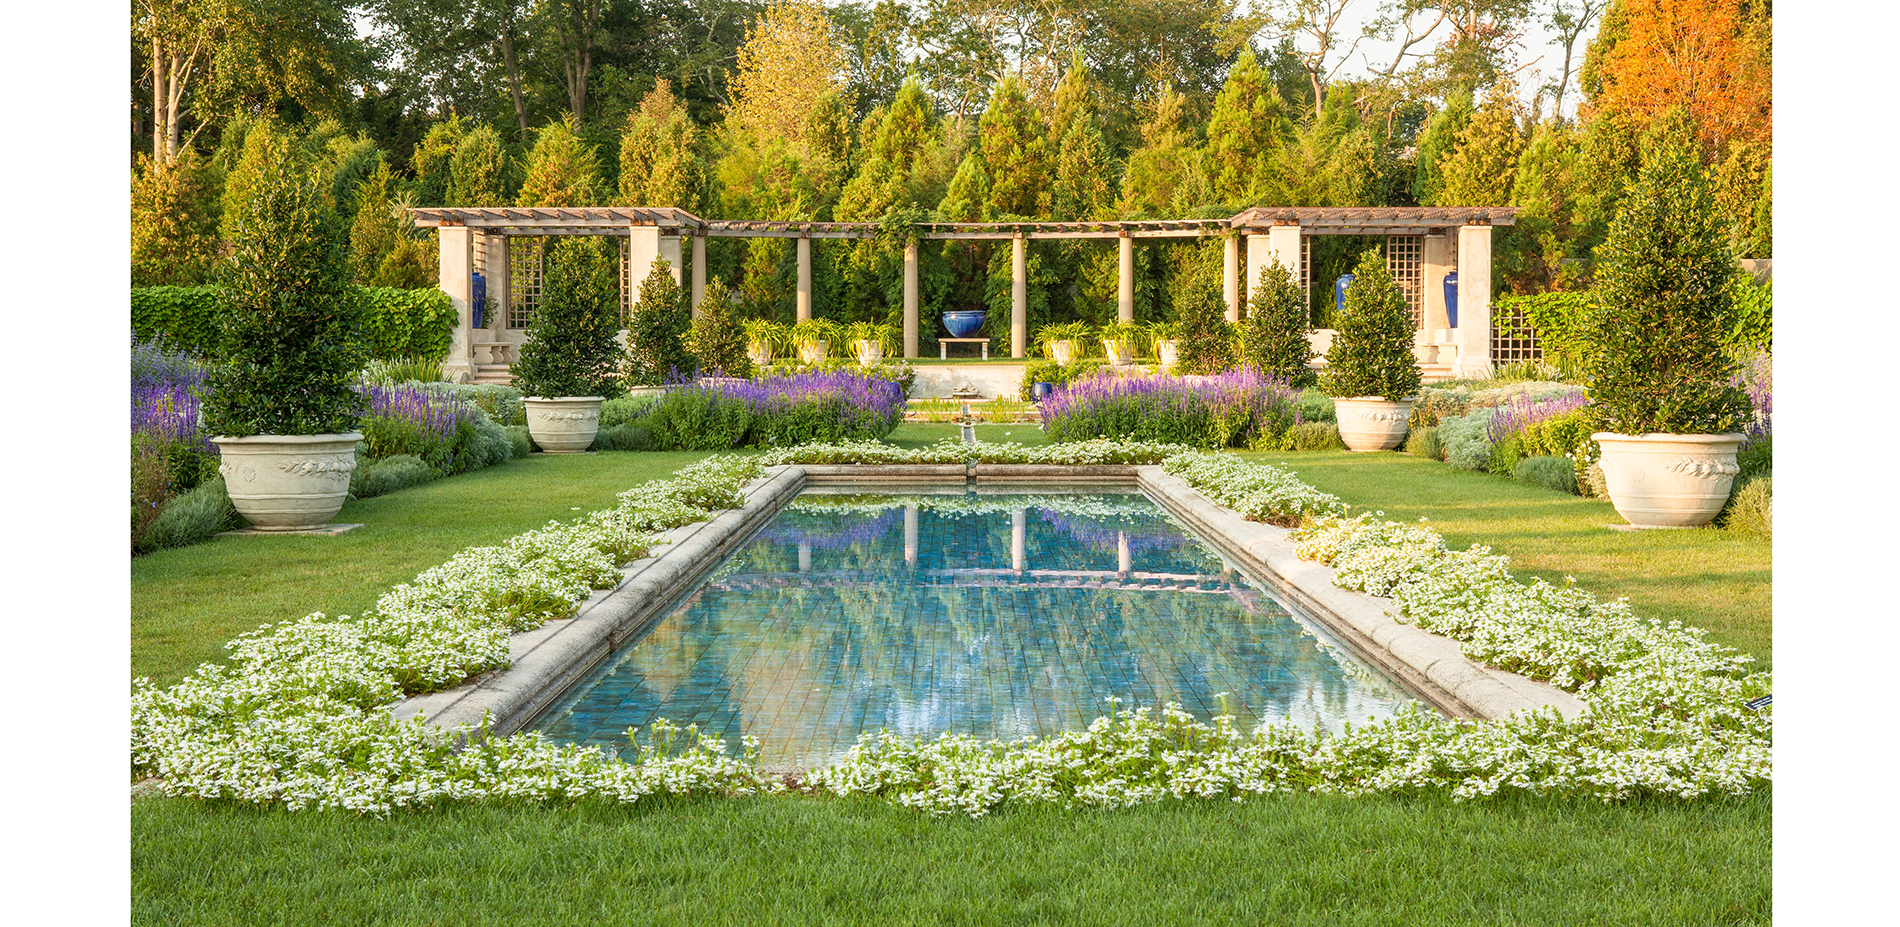 Looking south down the tiled pool towards the pergola, with the space framed by mixed evergreen trees.…